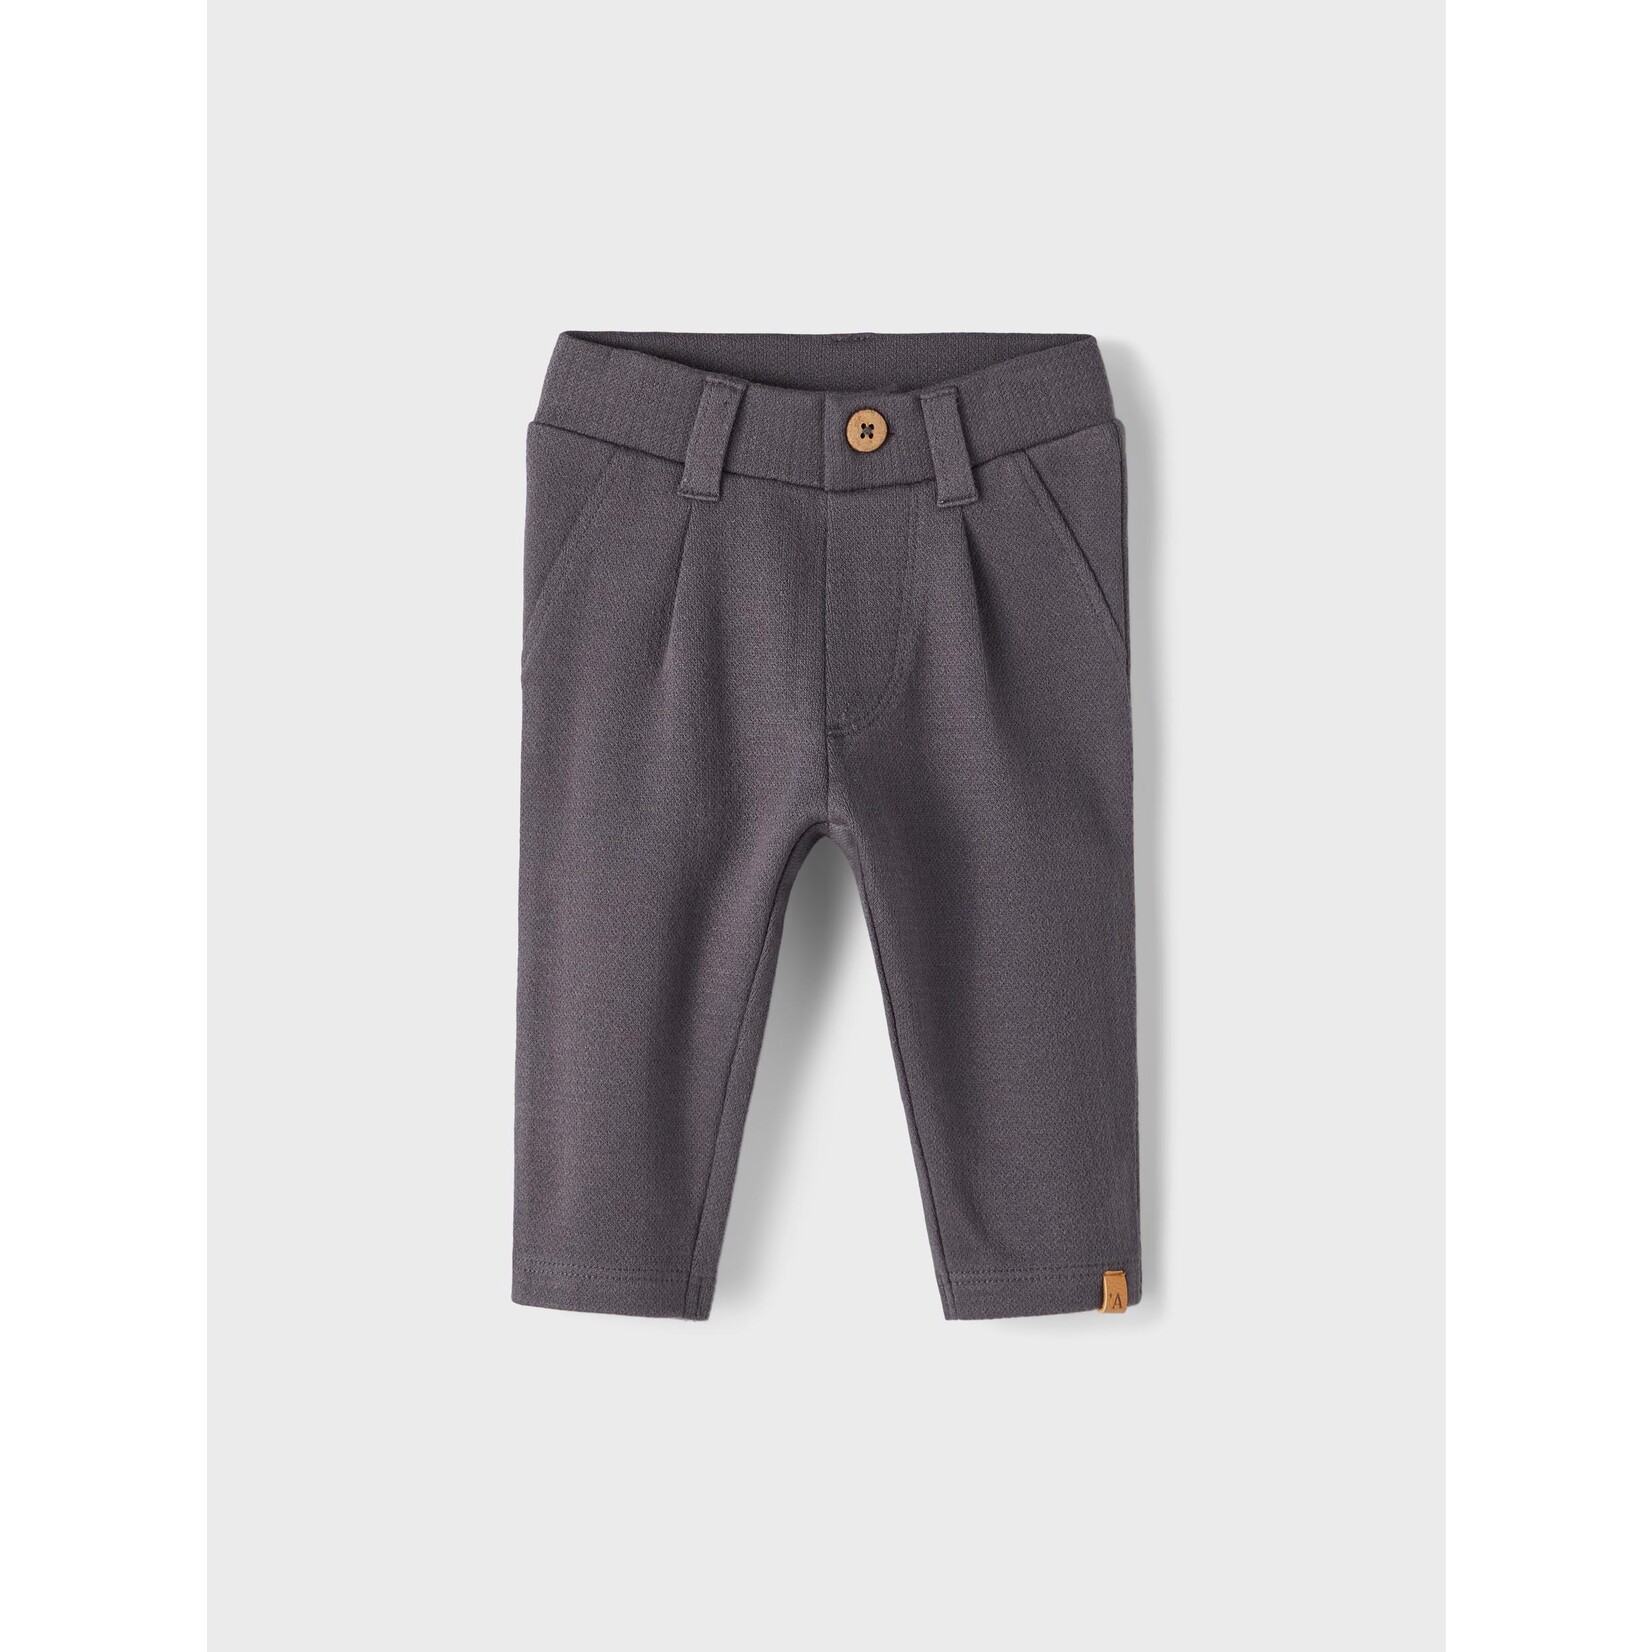 Lil Atelier Lil Atelier - NBMDICARD PANT OCT LIL - Periscope